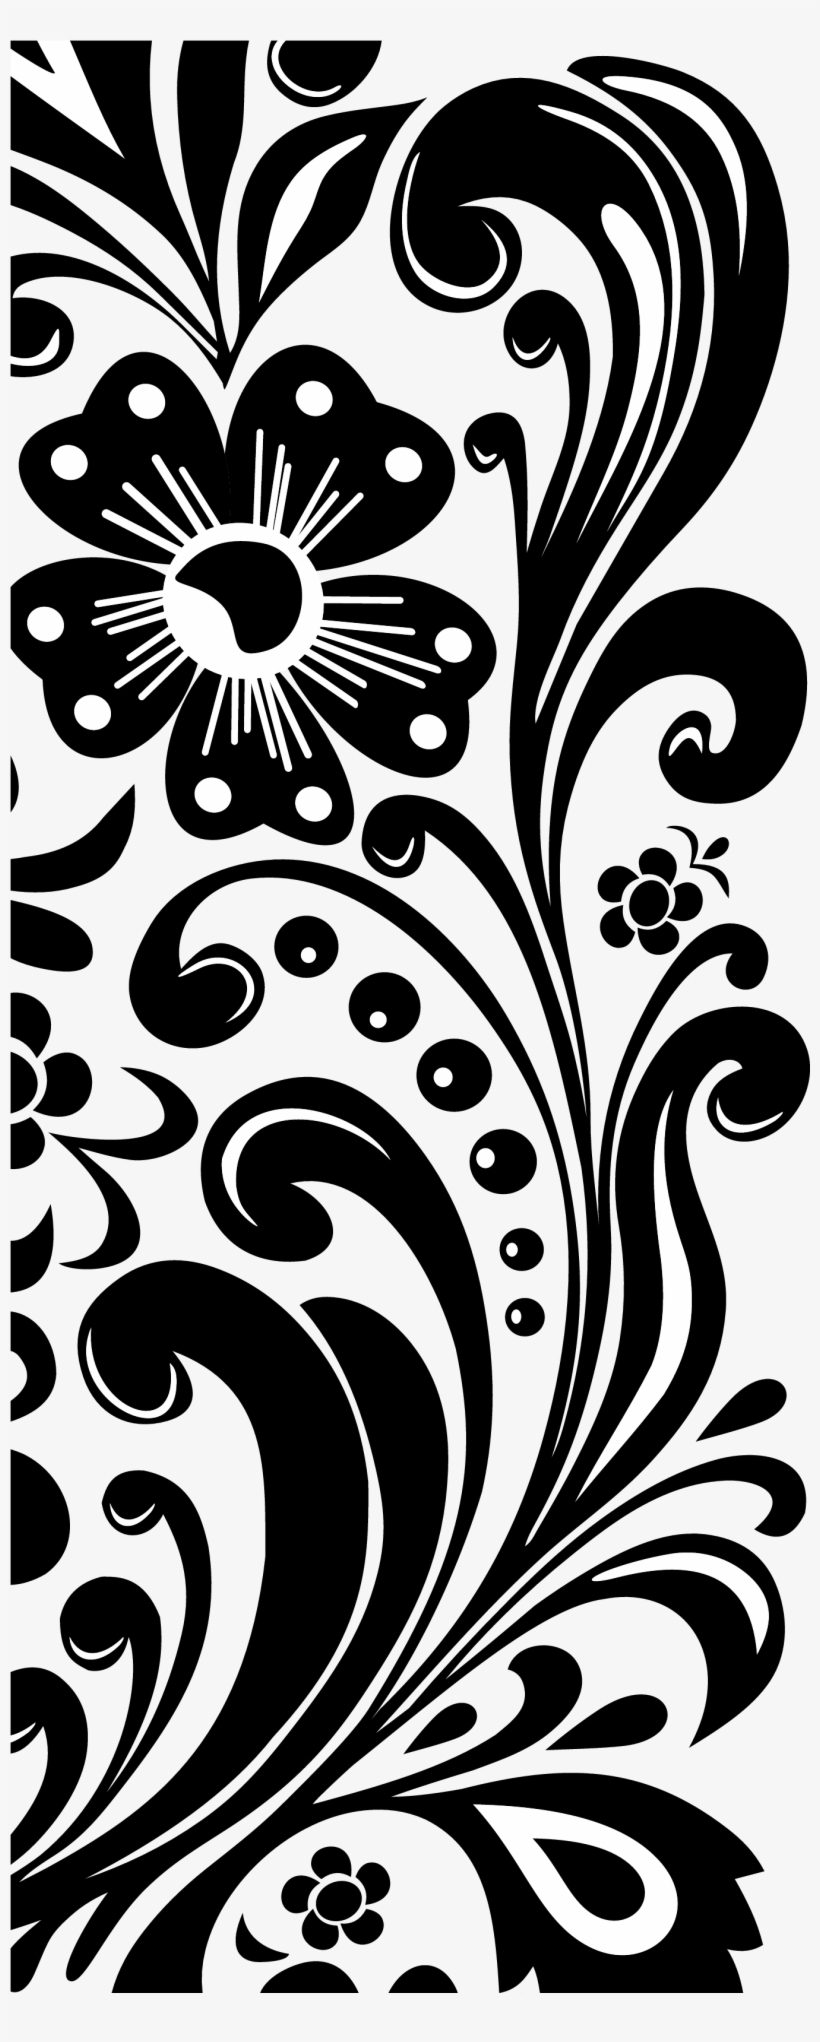 Vector Black And White Download Flower Border Clipart - Flower Border Clipart Black And White, transparent png #2162221